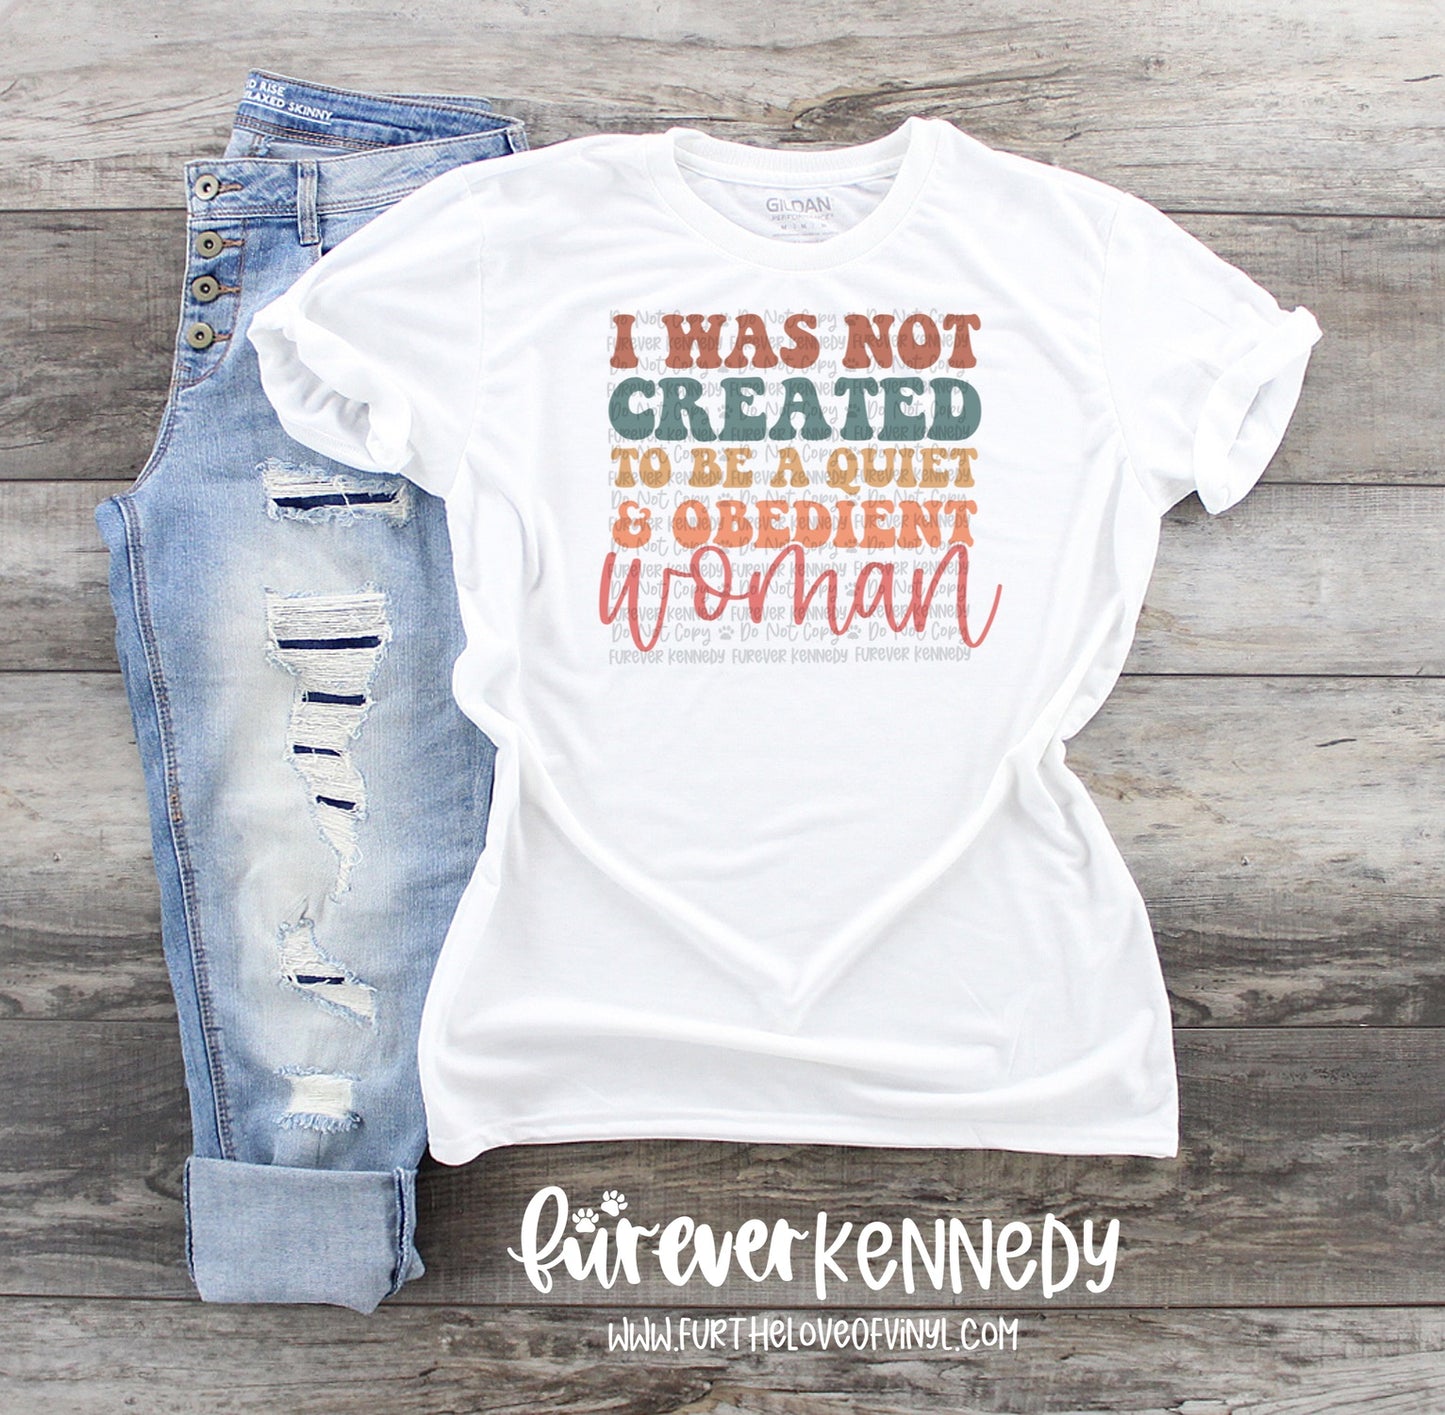 (MTO) Pick your Apparel: I was not created to be quiet (colorful)